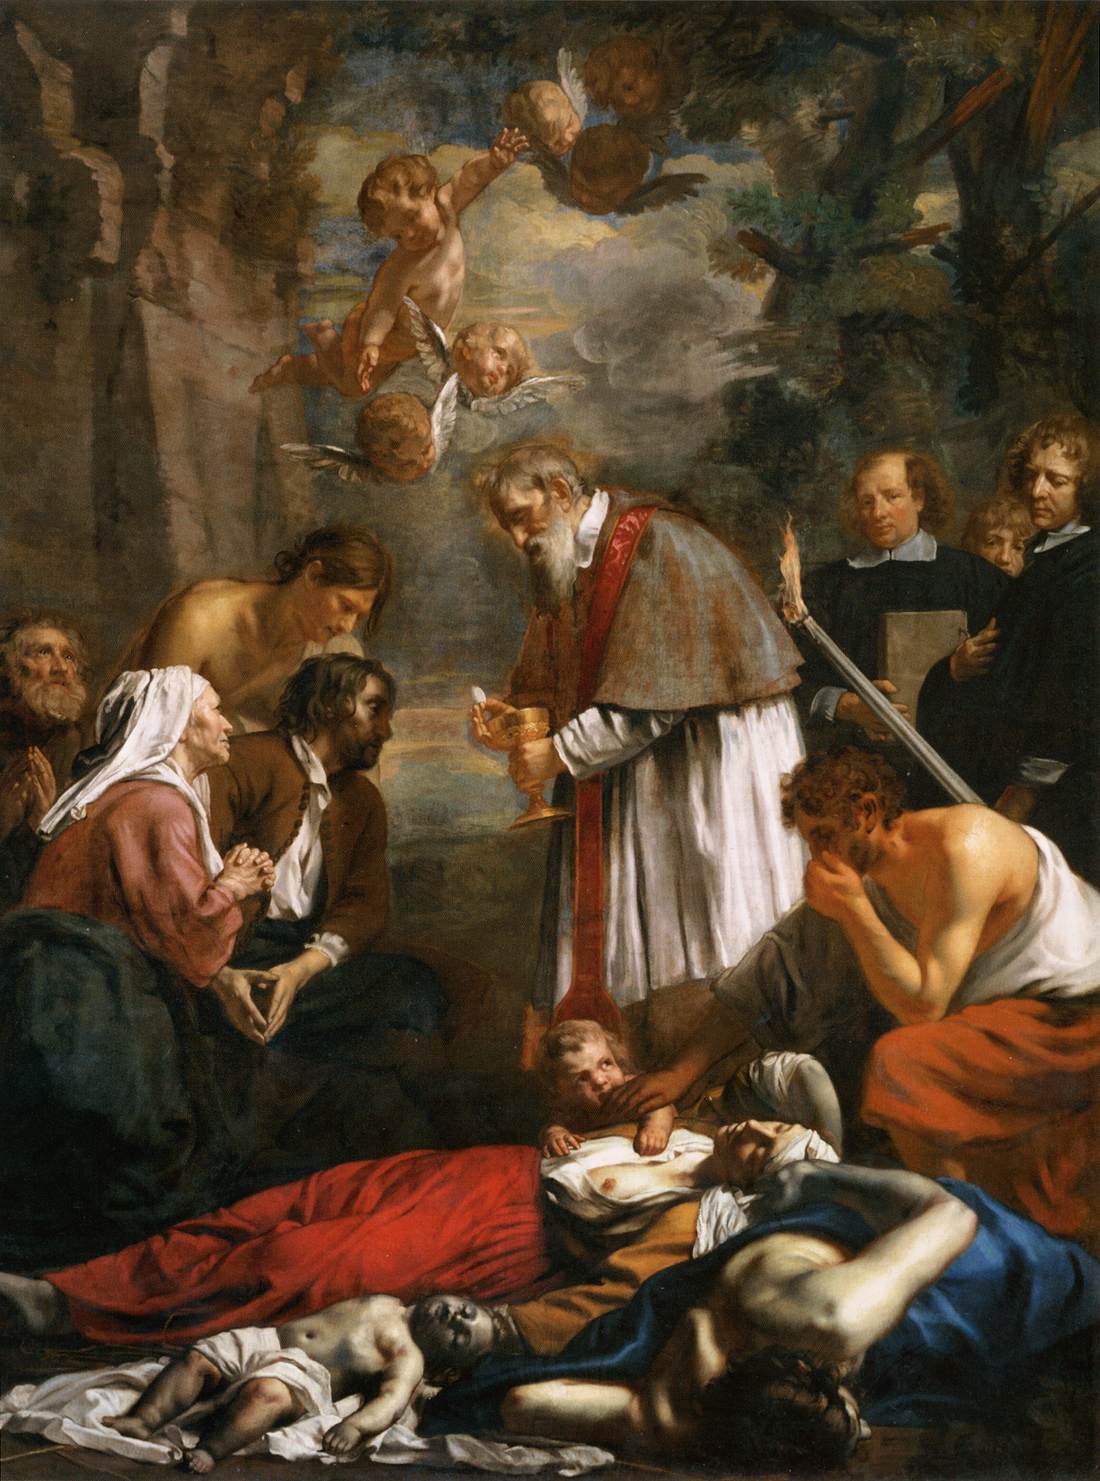 Saint Macarius of Ghent Giving Help to Victims of the Plague